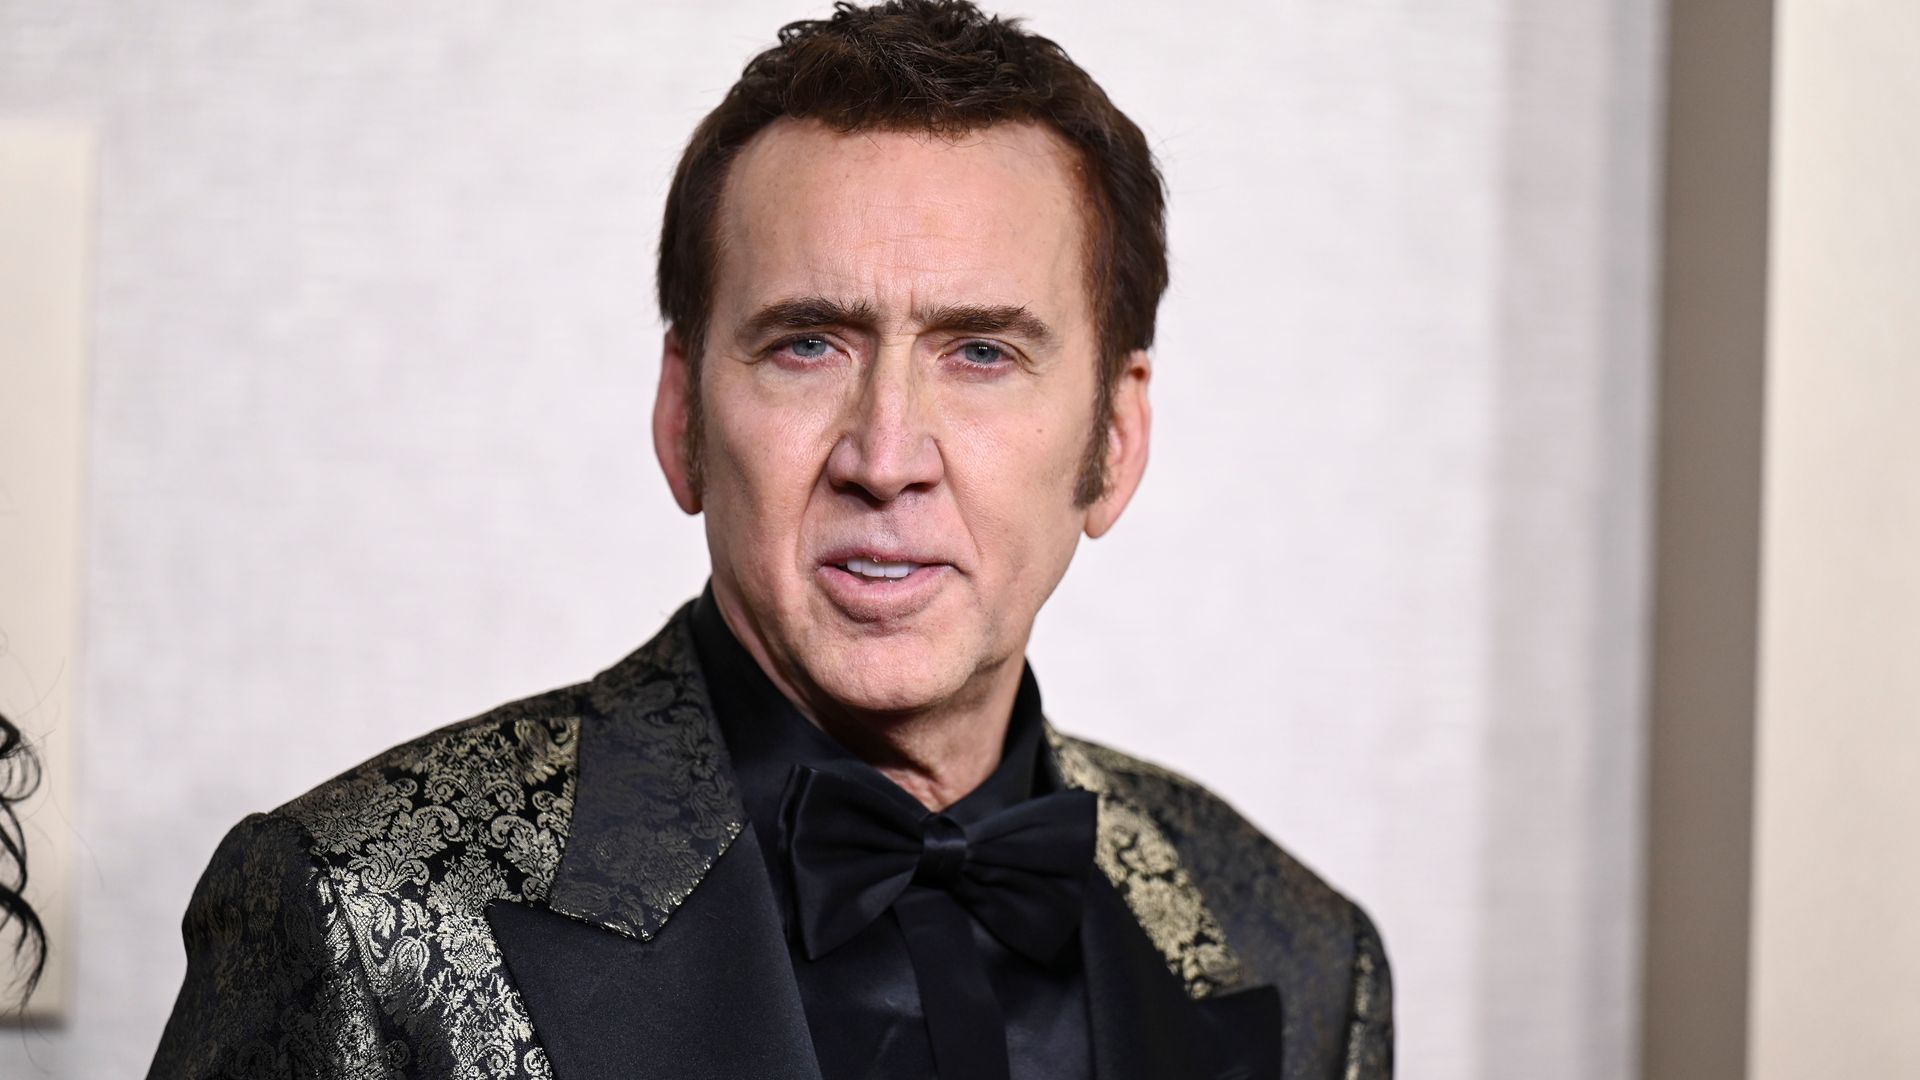 Nicolas Cage’s fresh heartbreak as son is arrested for assault with deadly weapon